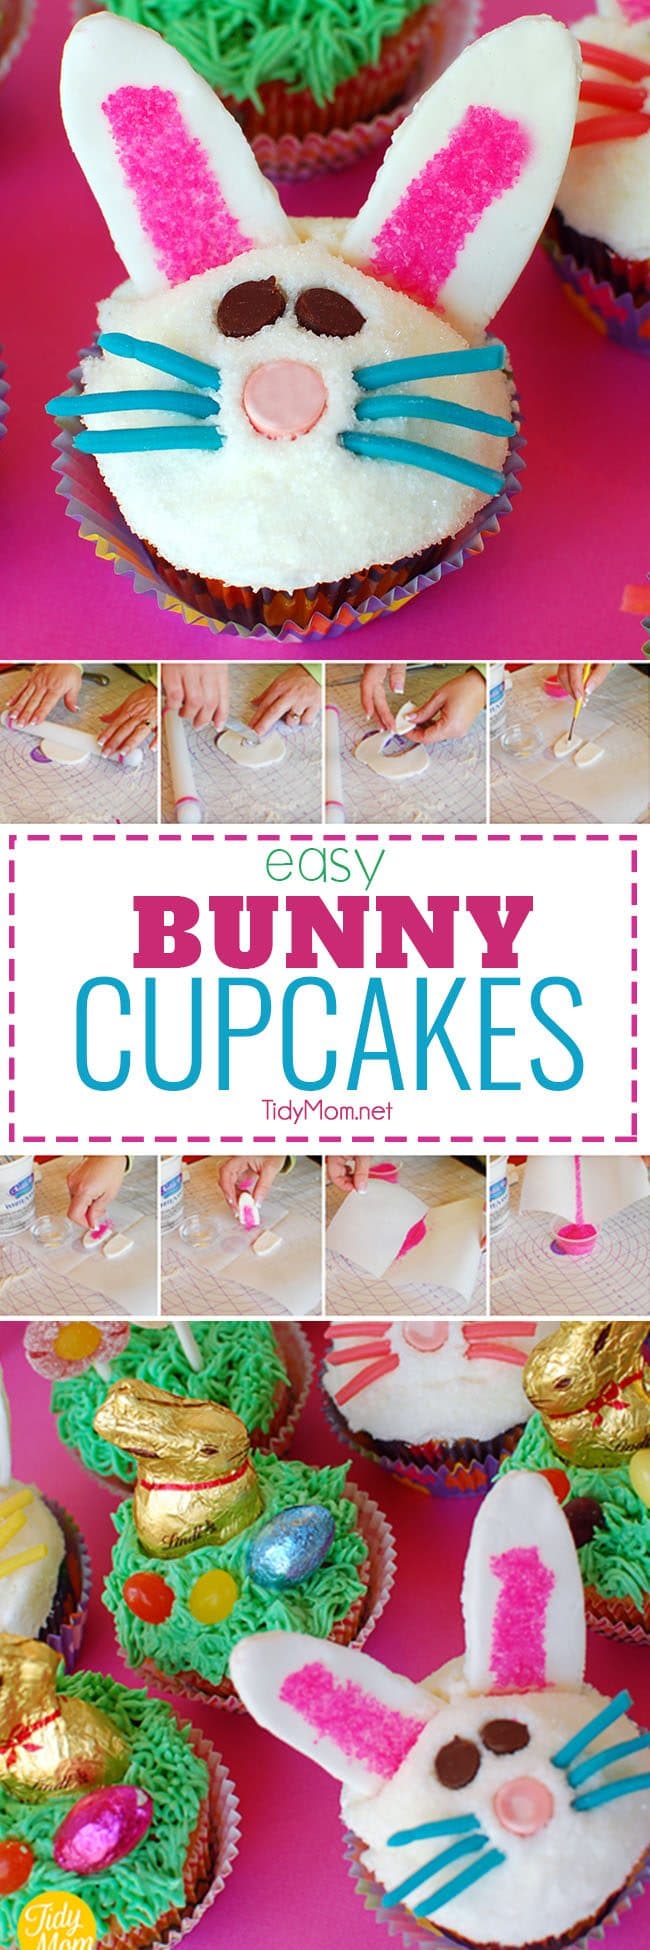 Easy Bunny Cupcakes perfect for Easter. Fondant and sprinkles make the cute ears, while candy make the face and whiskers. Learn how to make these bunny cupcakes at TidyMom.net